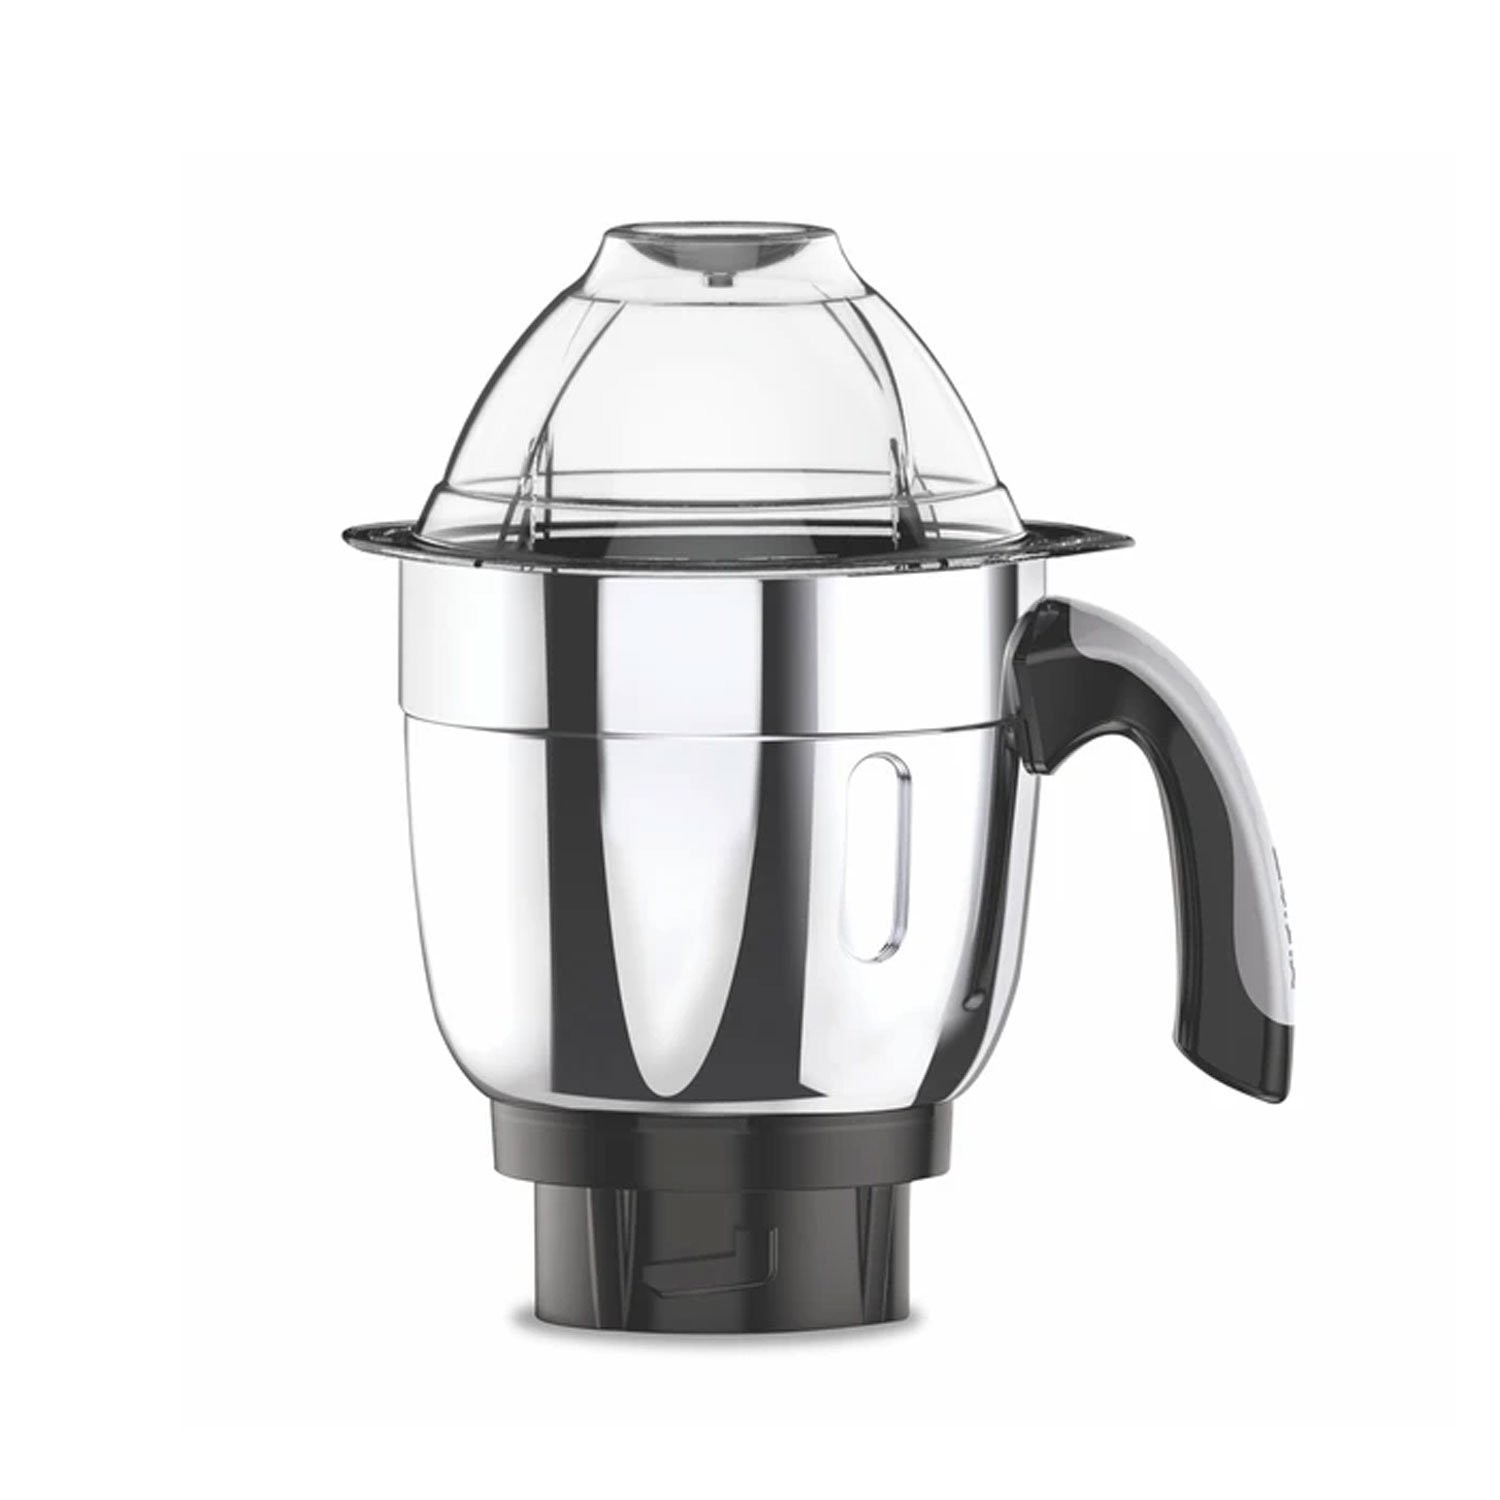 vidiem-eva-nero-650w-stainless-steel-jars-indian-mixer-grinder-spice-coffee-grinder-110v-for-use-in-canada-usa3